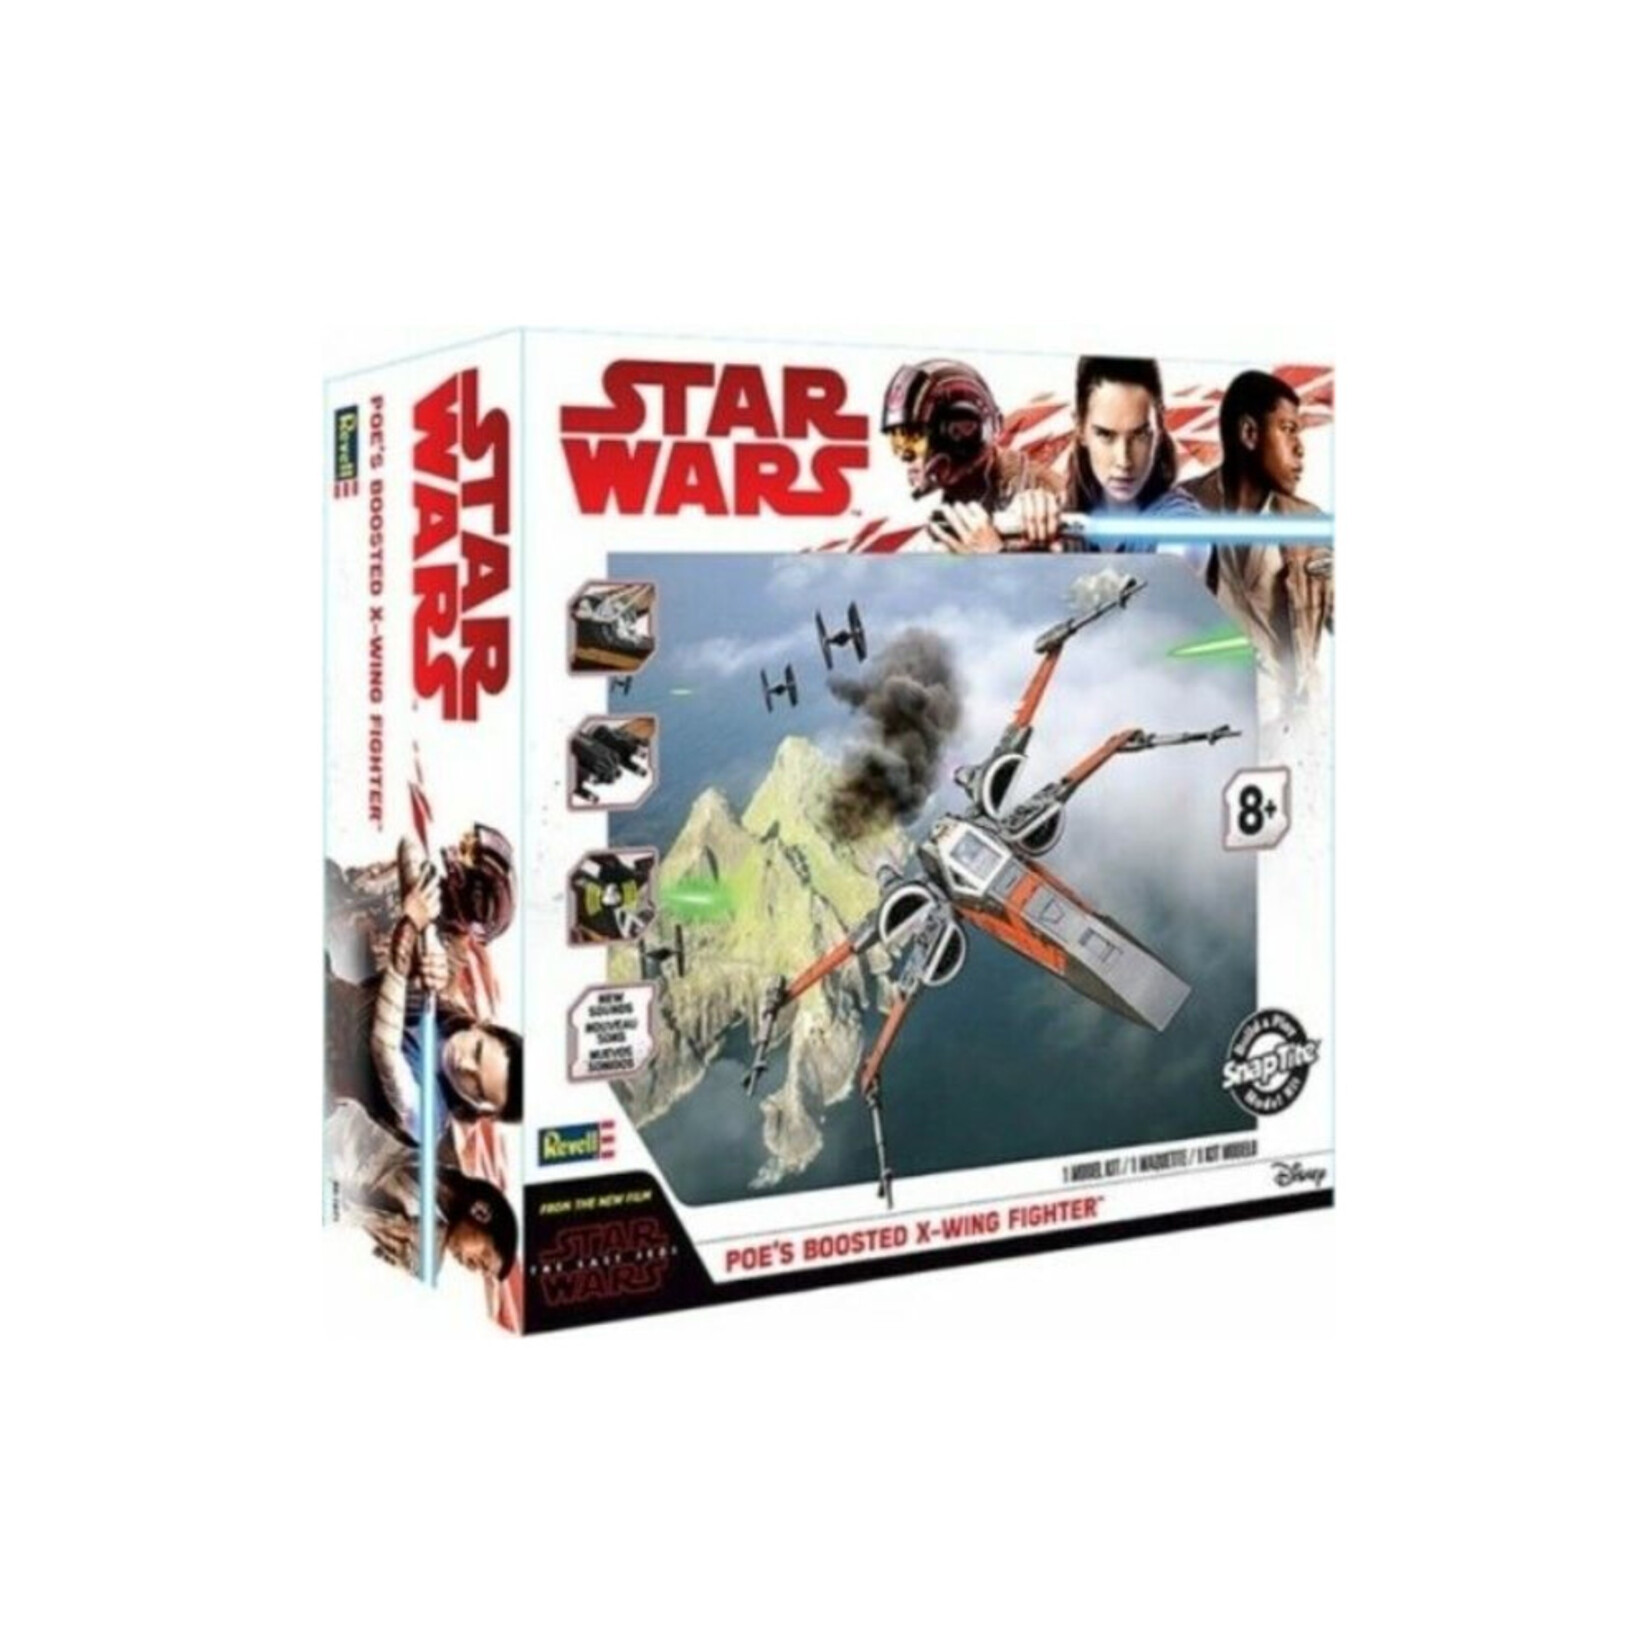 REVELL REVELL STAR WARS SNAPTITE 1/78 POE’S BOOSTED X-WING